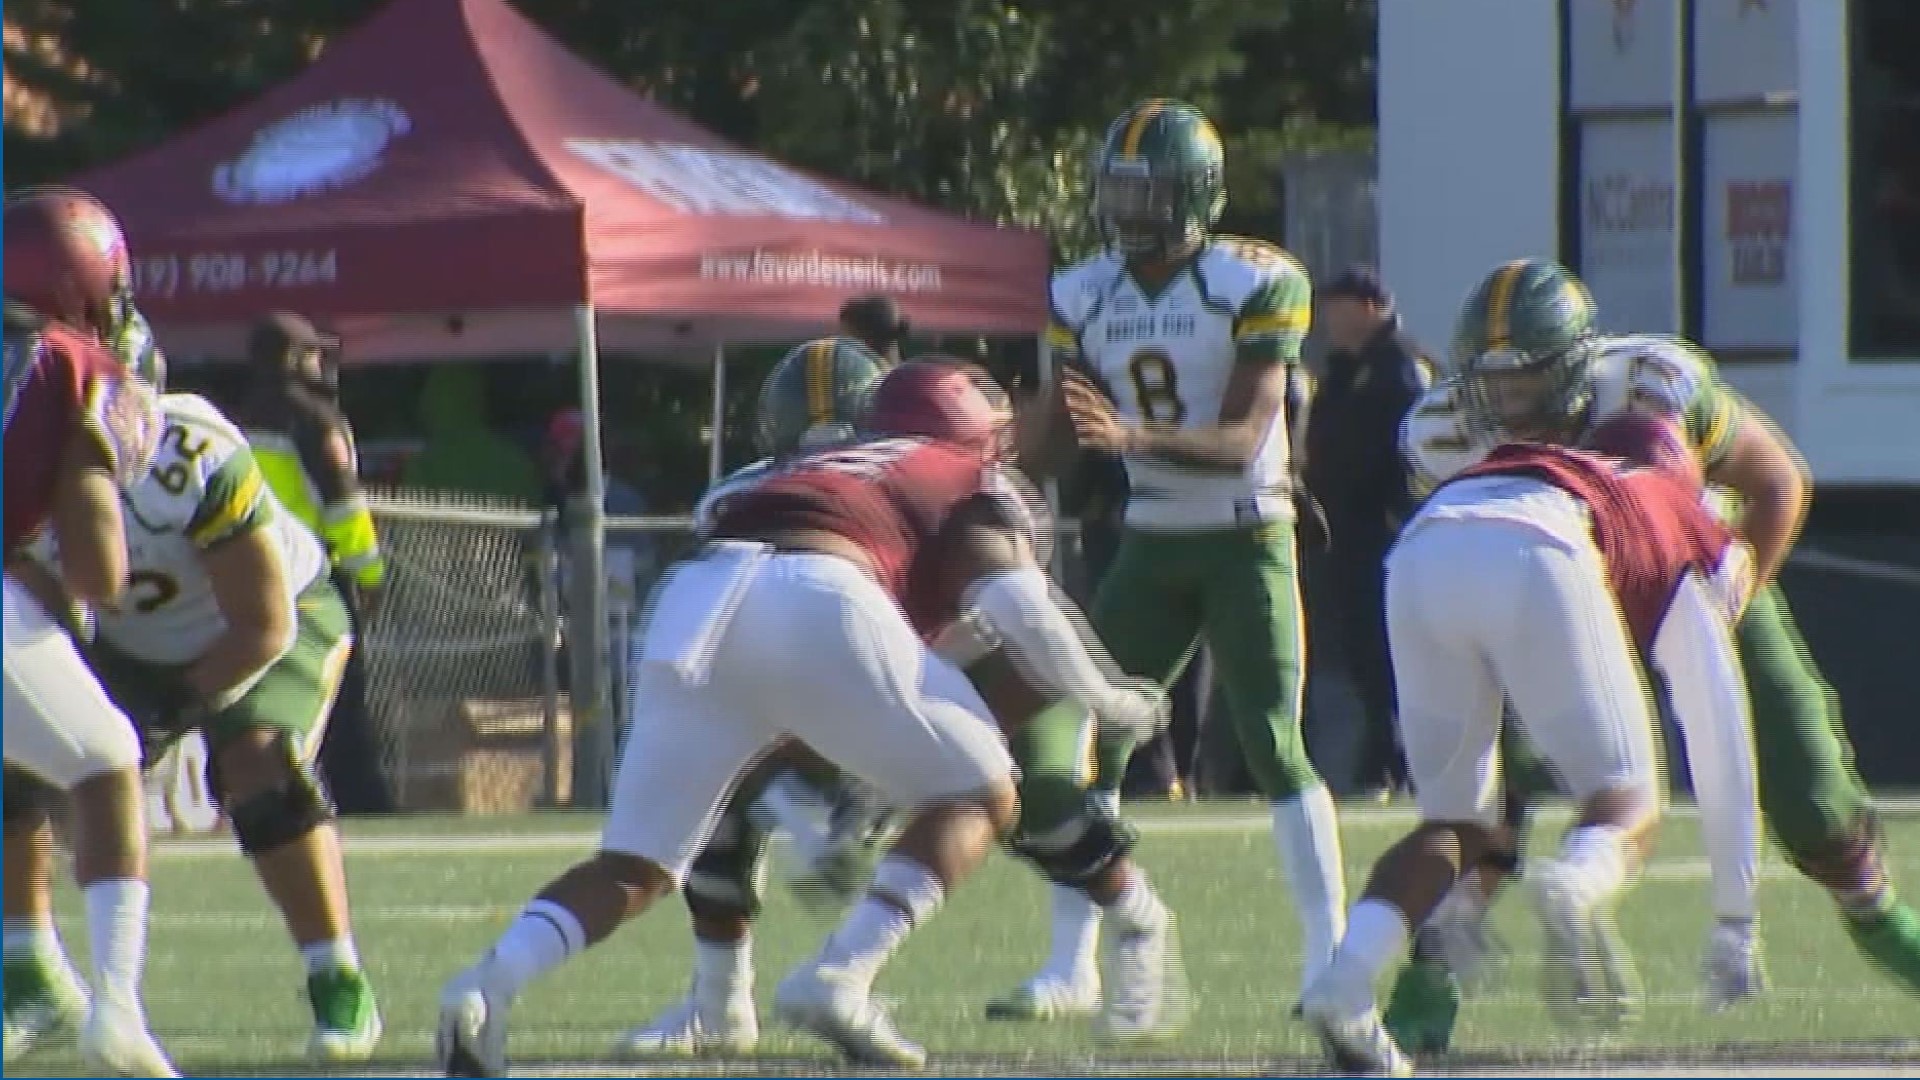 Juwan Carter threw two touchdown passes, Justin Smith had 106 yards receiving and a score and Norfolk State beat North Carolina Central 38-21 on Saturday.